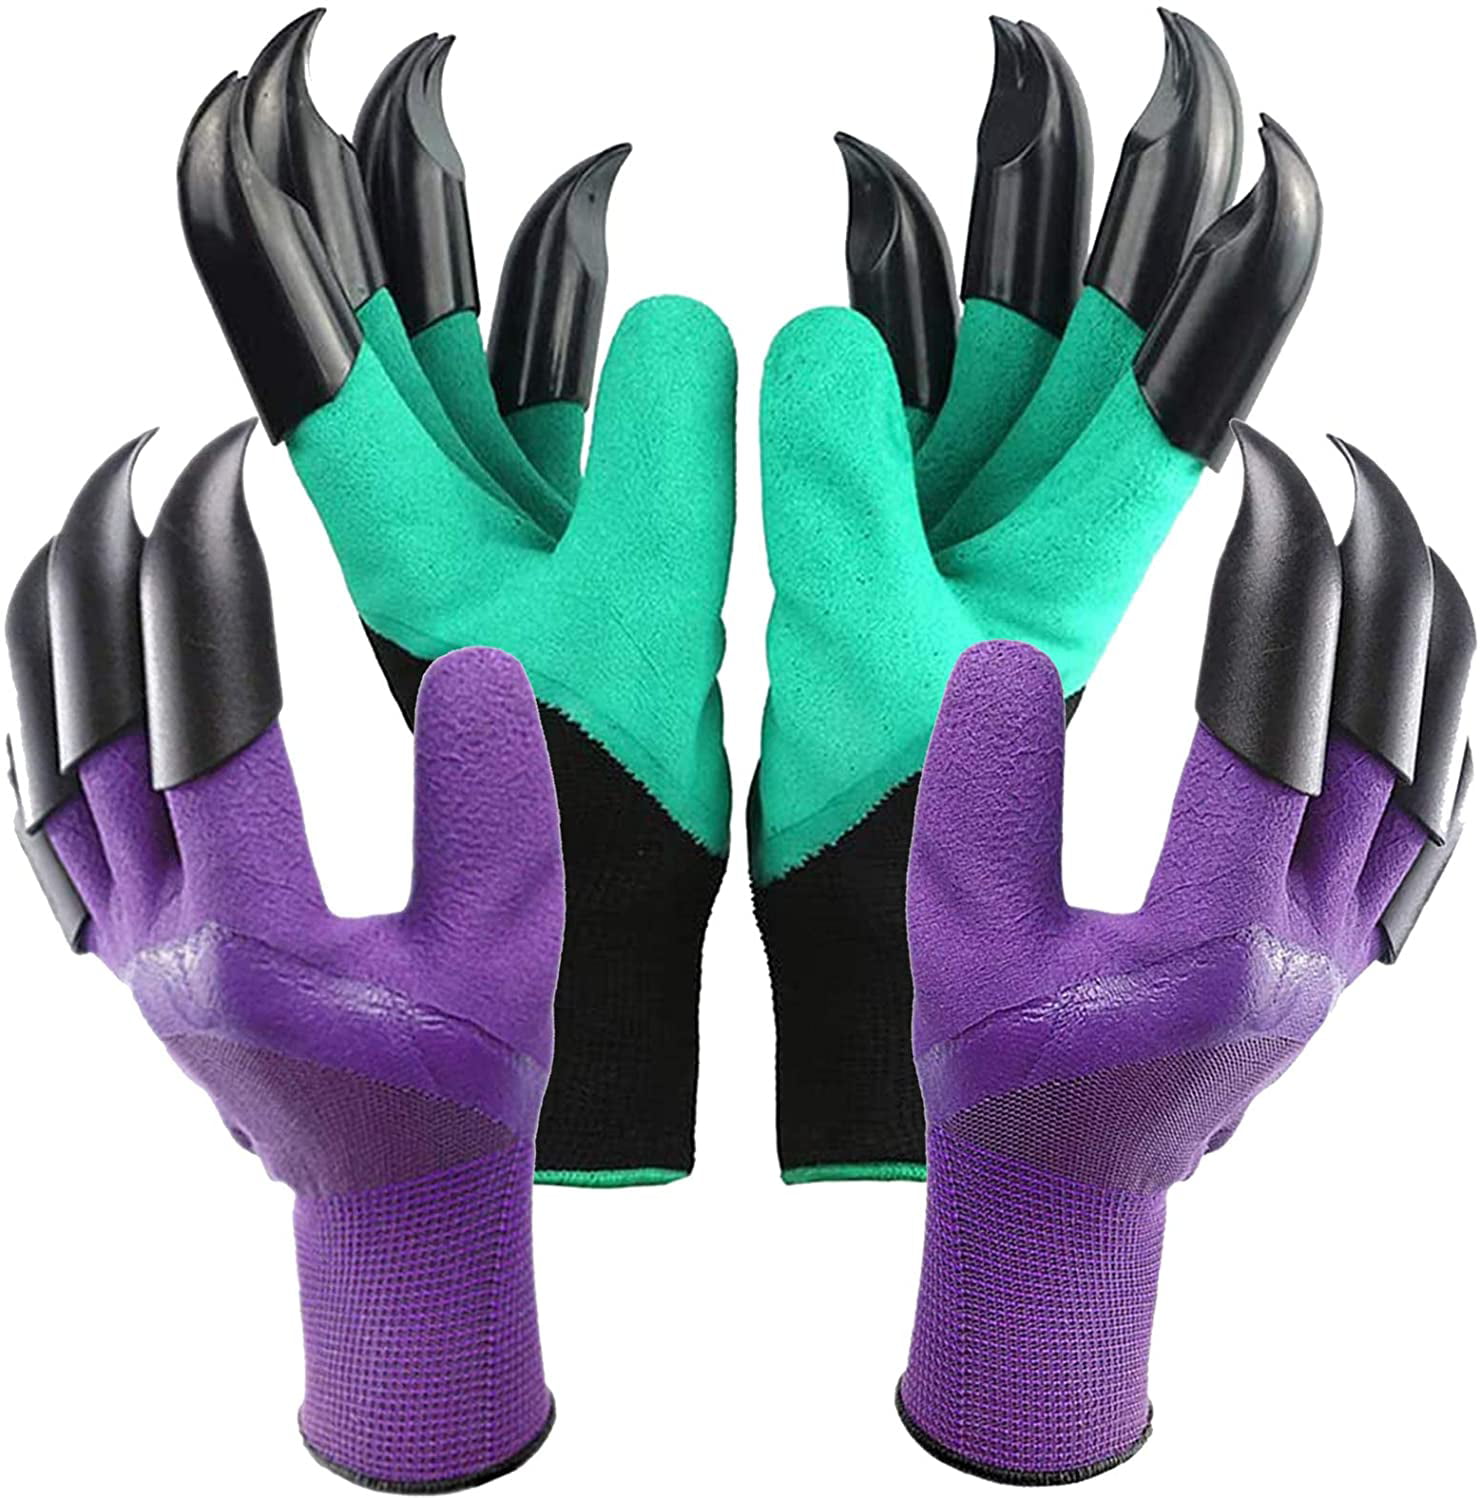 Garden Genie Gloves Claws for Digging Planting Gardening Gloves Multiple Colour